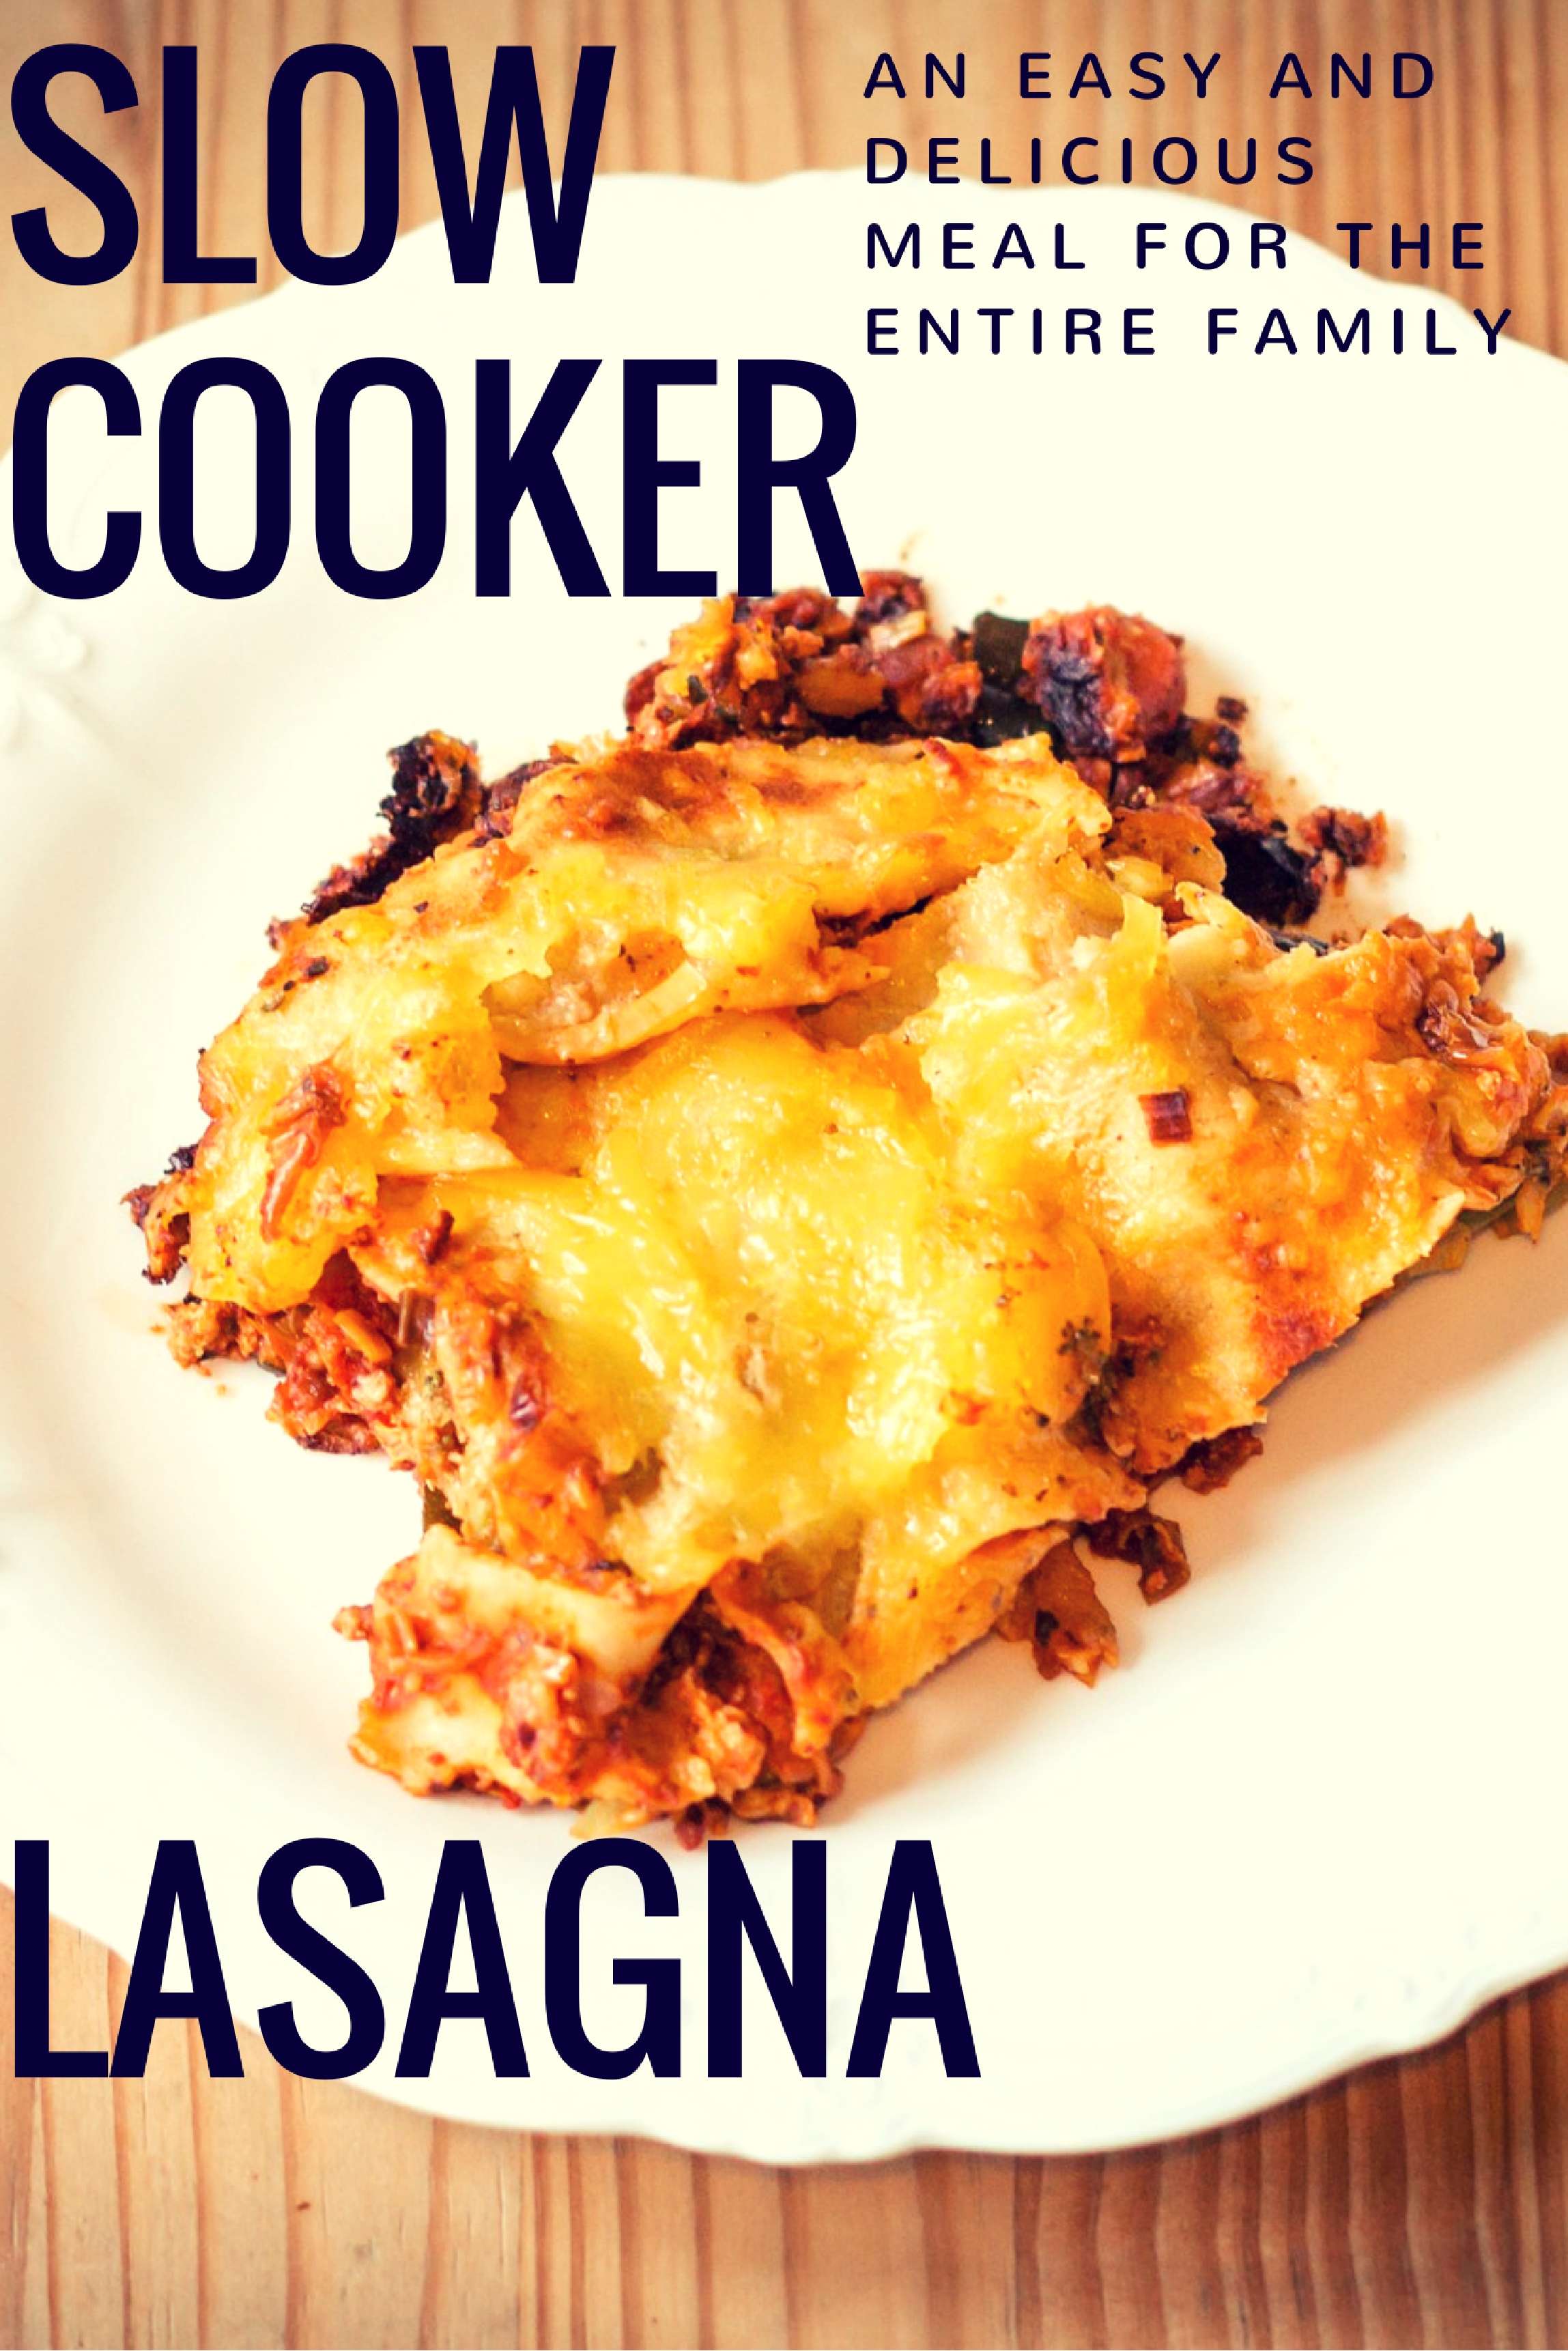 Slow Cooker Lasagna - an easy and delicious meal for the entire family